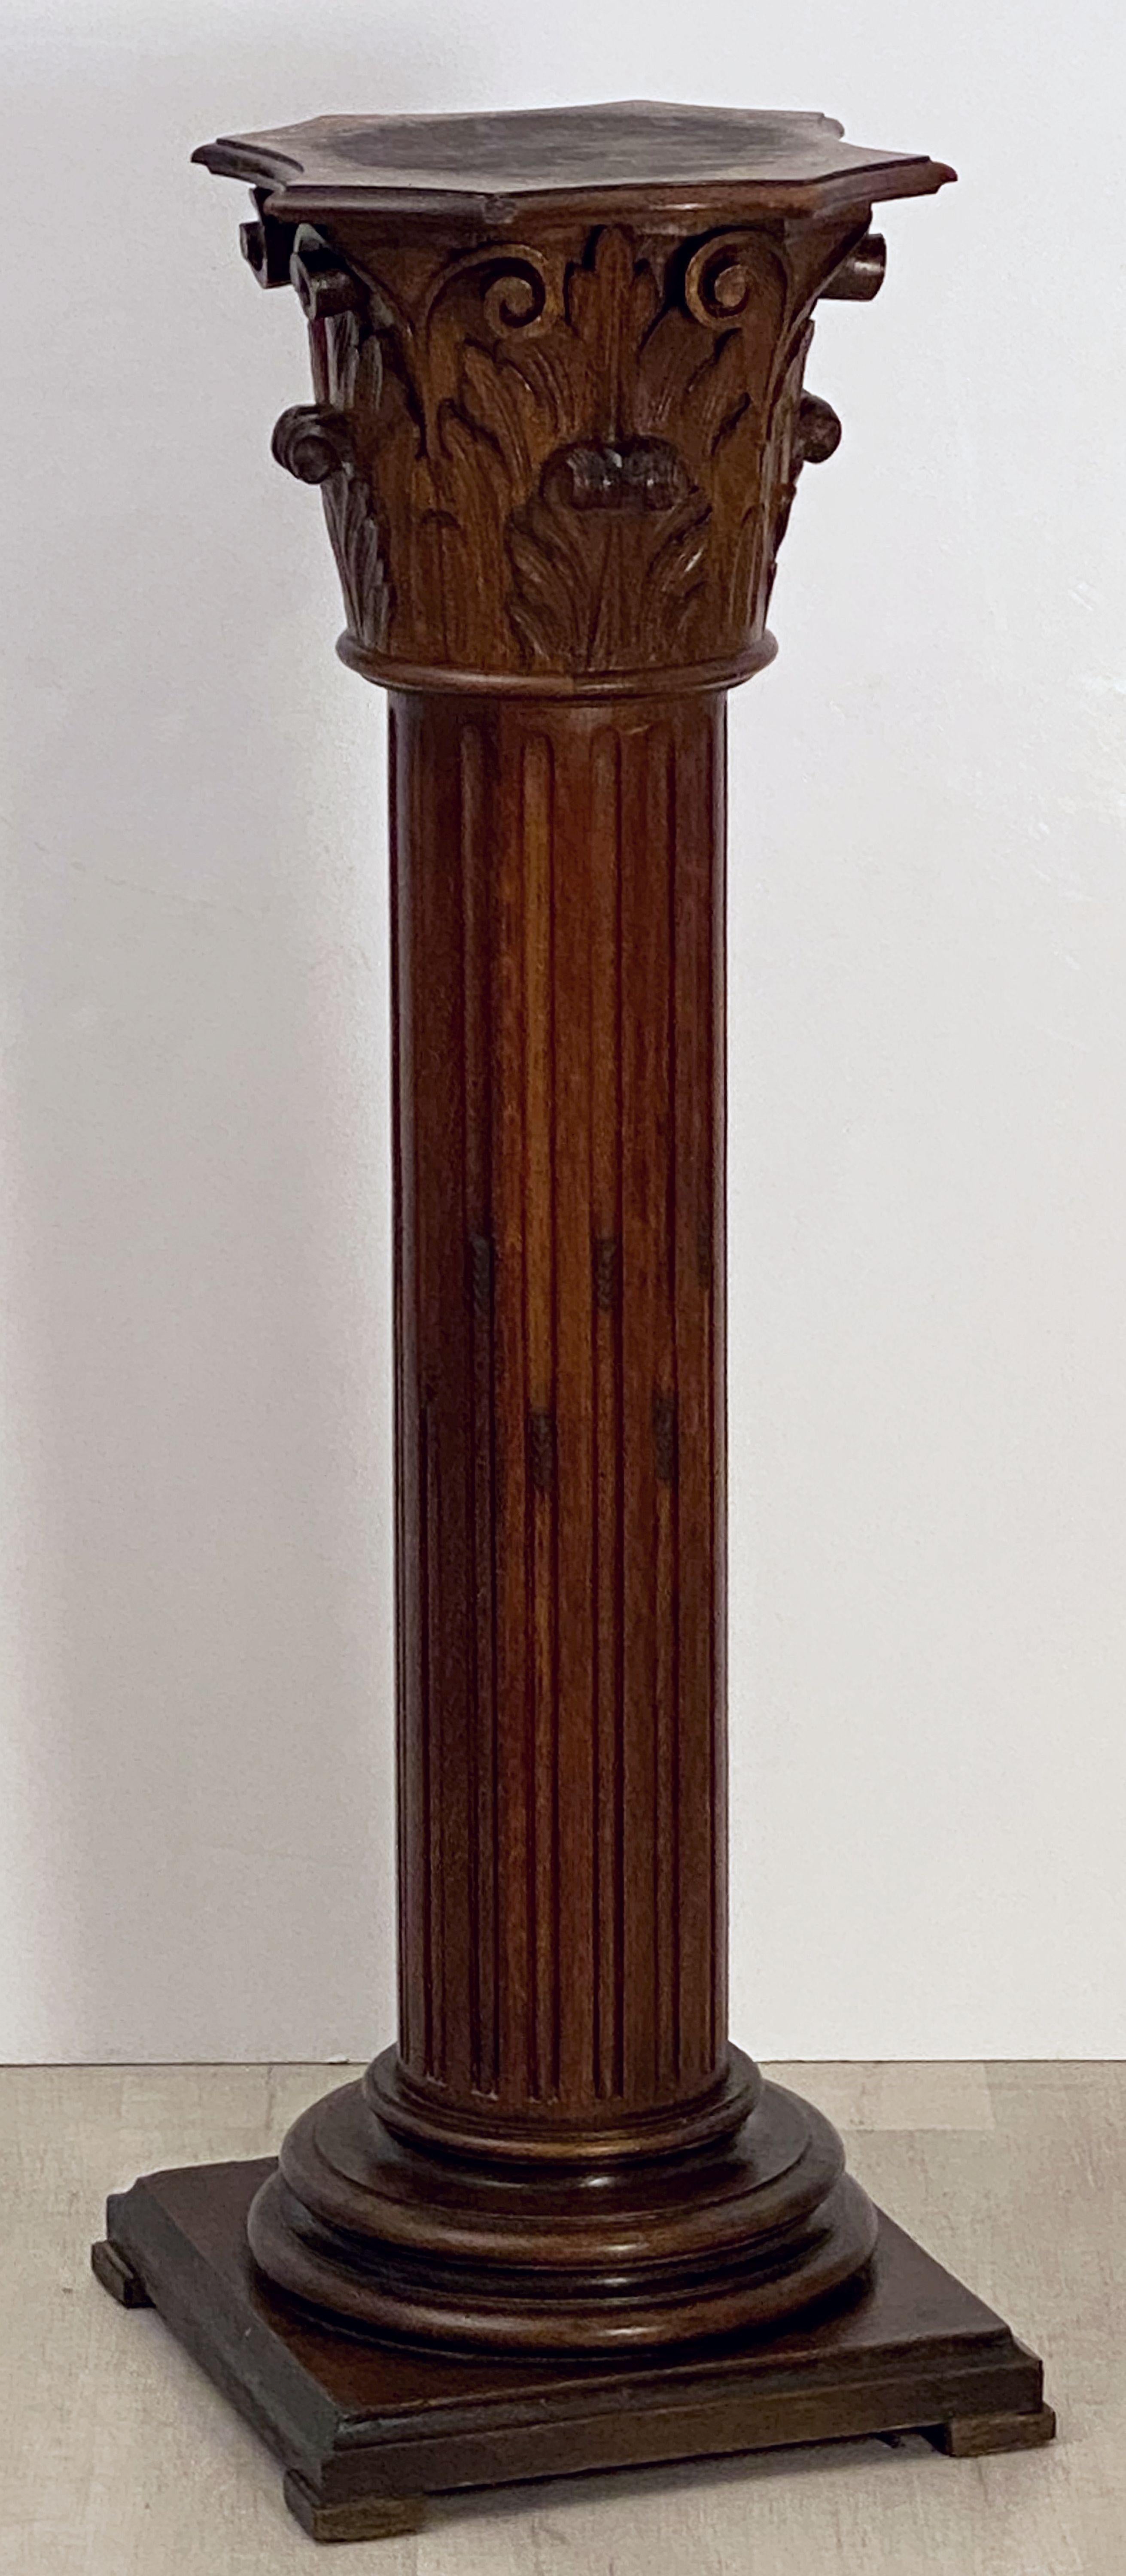 Tall Neoclassical Wooden Column Pedestal Stand or Plinth from France 3